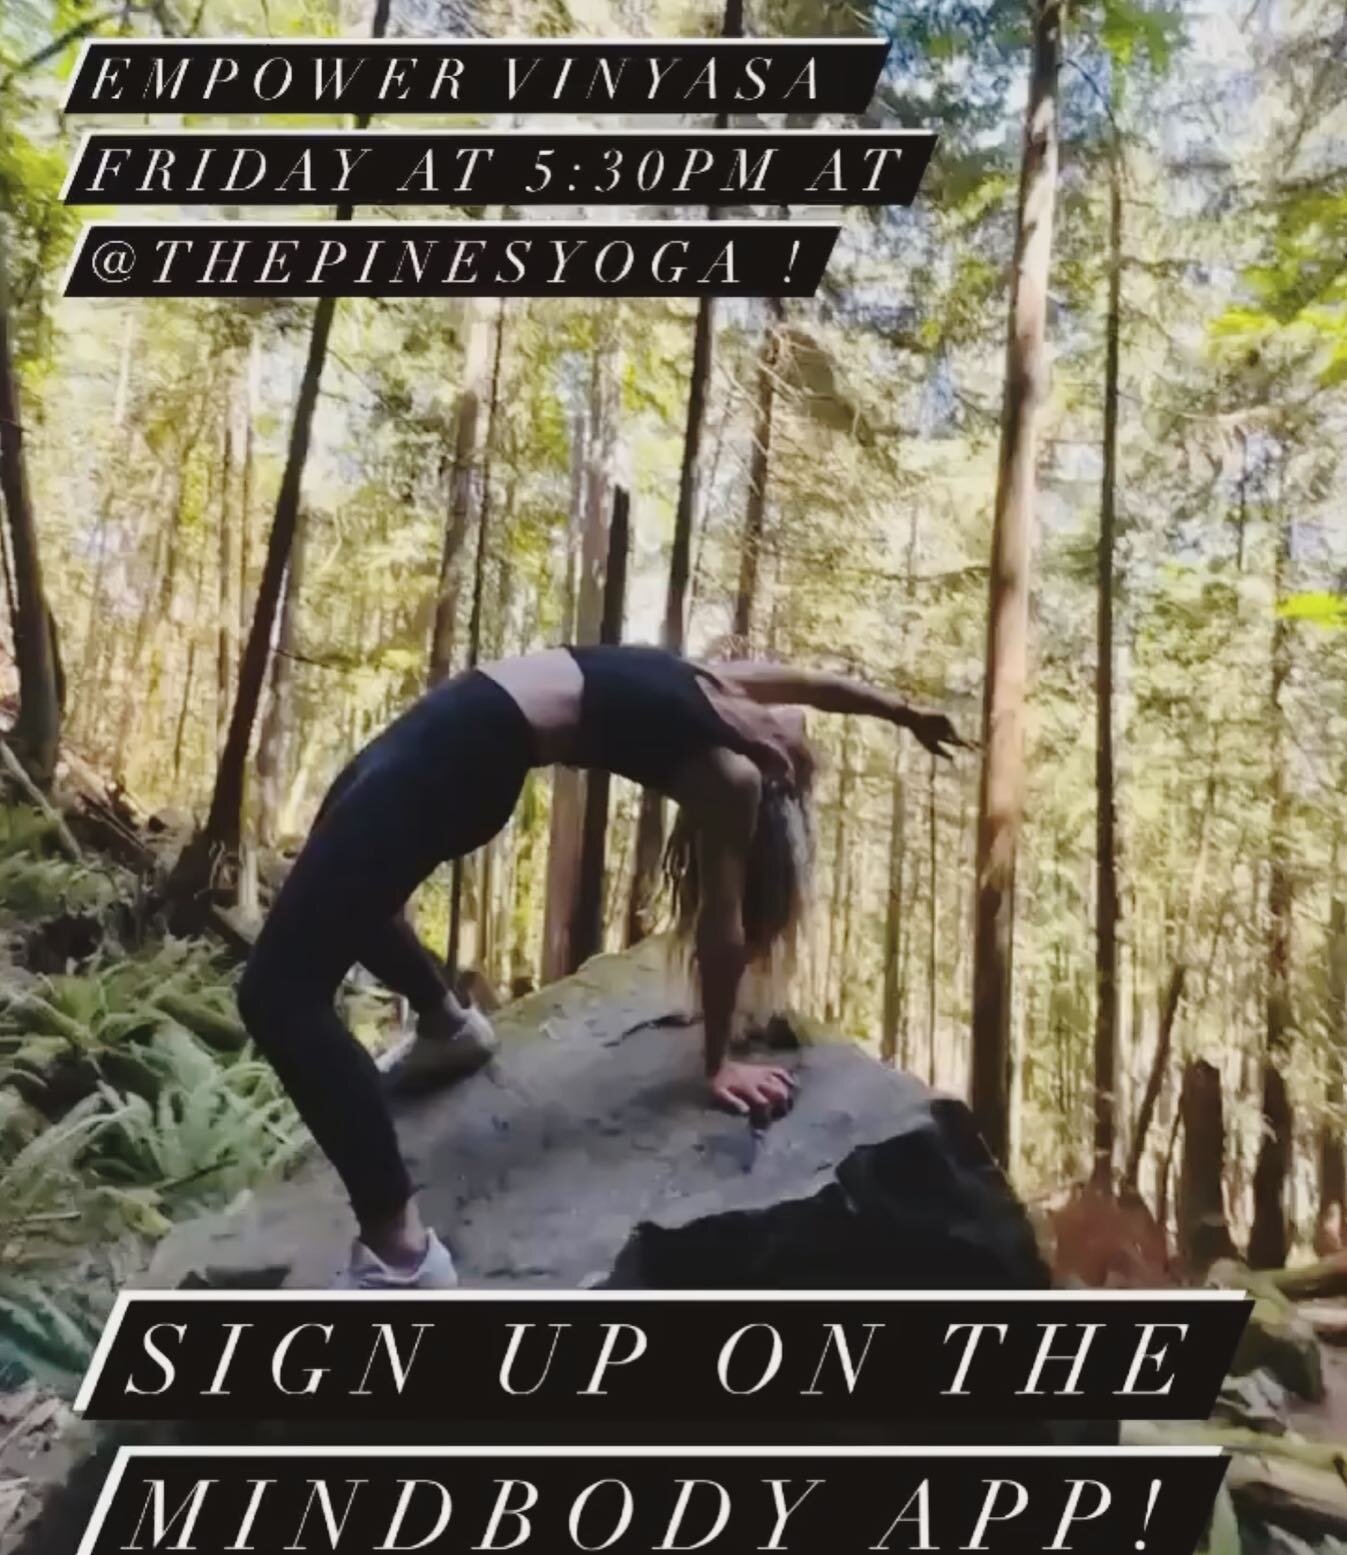 The amazing @amyraecreech is teaching every Friday with us! If you haven&rsquo;t tried her class yet - you must come! 

Friday at 5:30! Join us! 

Root. Rise. Revive. 

#thepinesyoga #comoxvalleyyoga